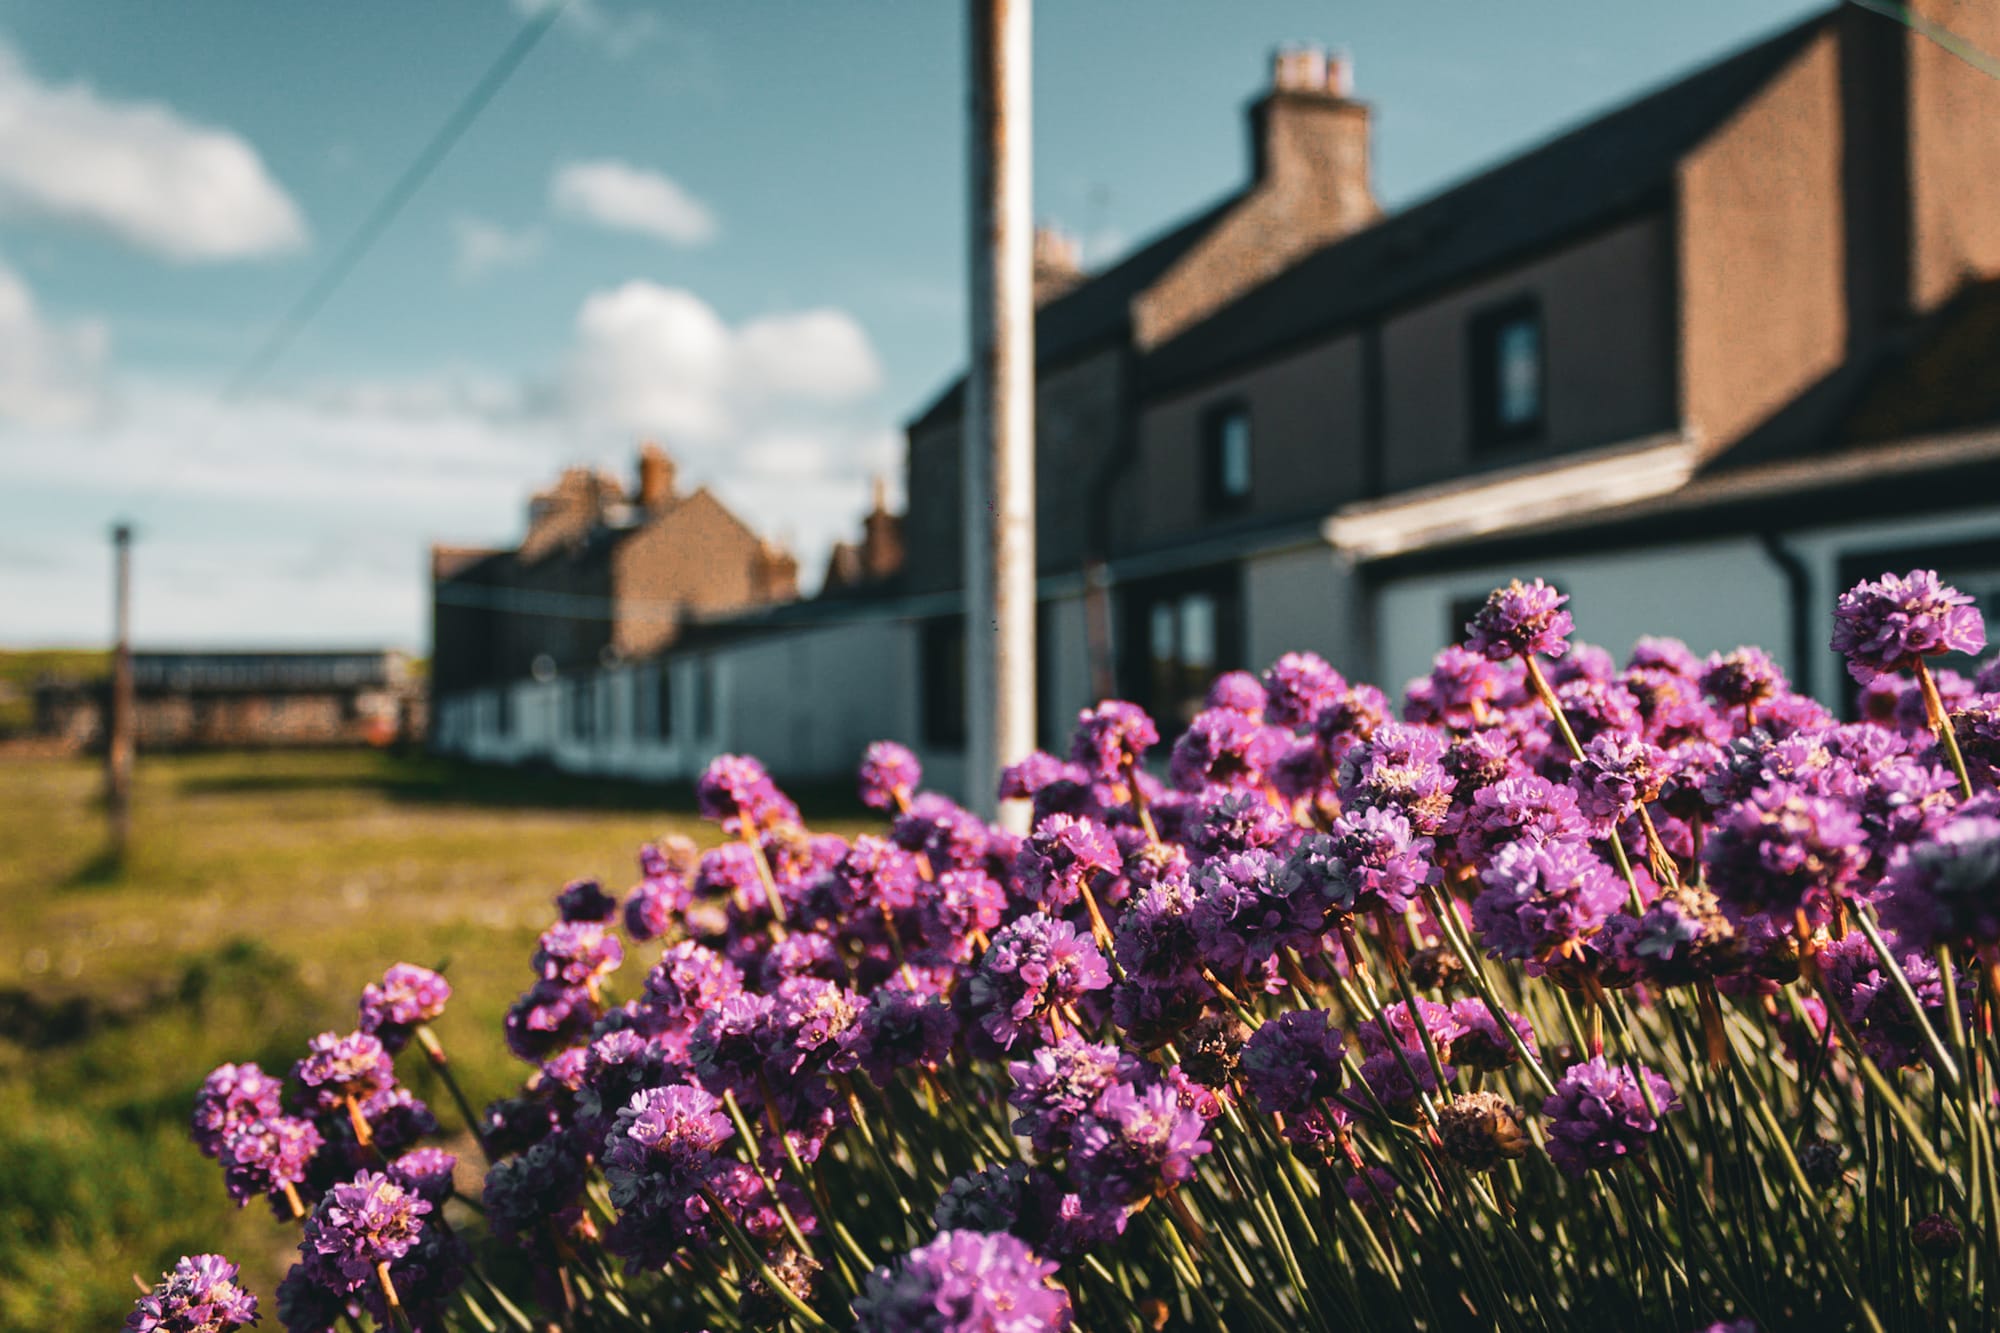 Close-up of vibrant purple flowers in Fittie, Aberdeen, with seaside houses and a grassy area in the background under a clear blue sky.